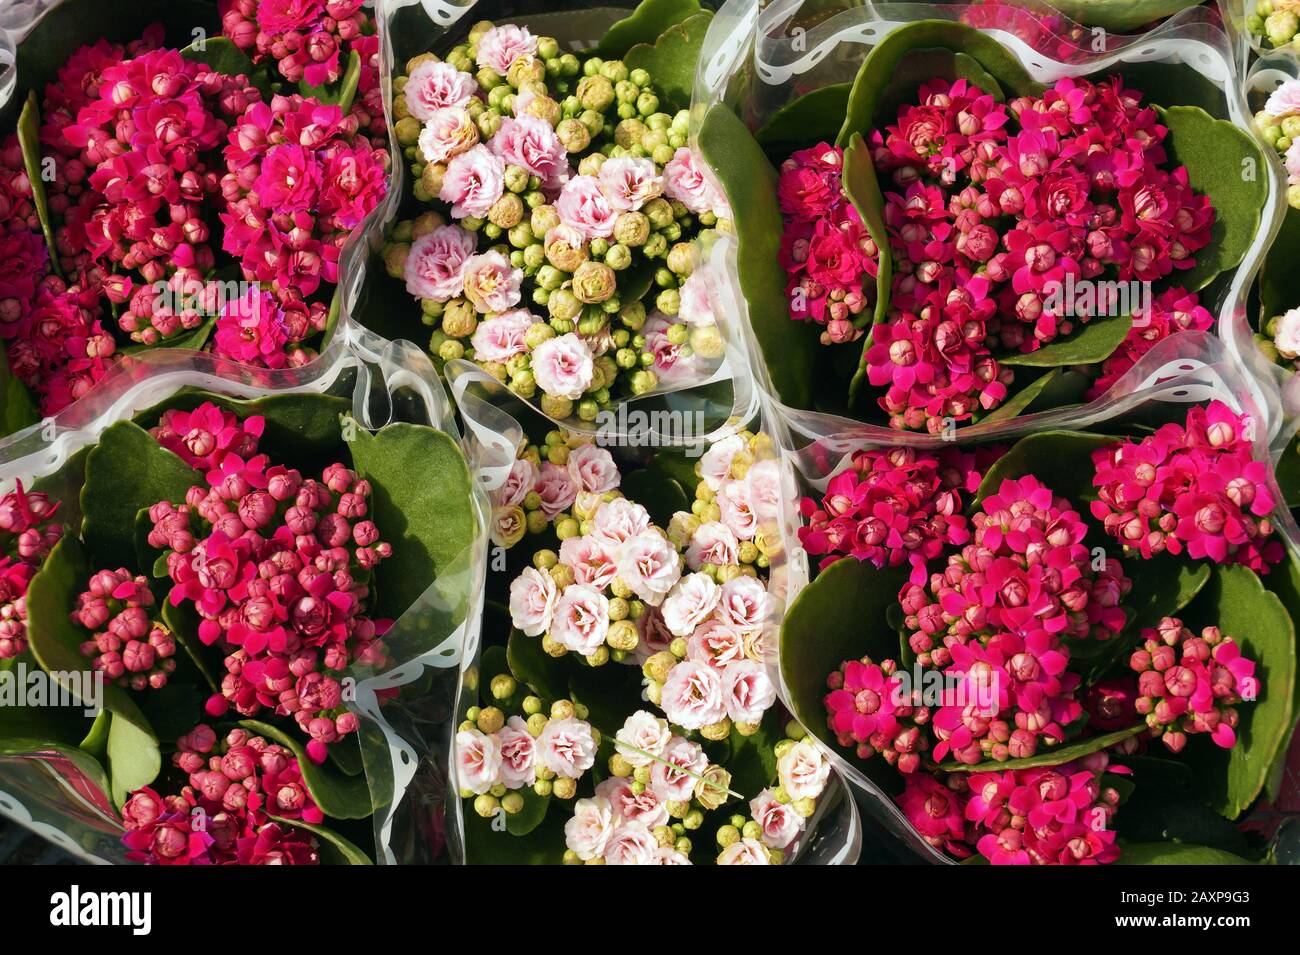 Kalanchoe  in pots is commonly purchased during the Lunar Calendar New Year for decorative purposes, it also forms decorations on tables during Easter Stock Photo